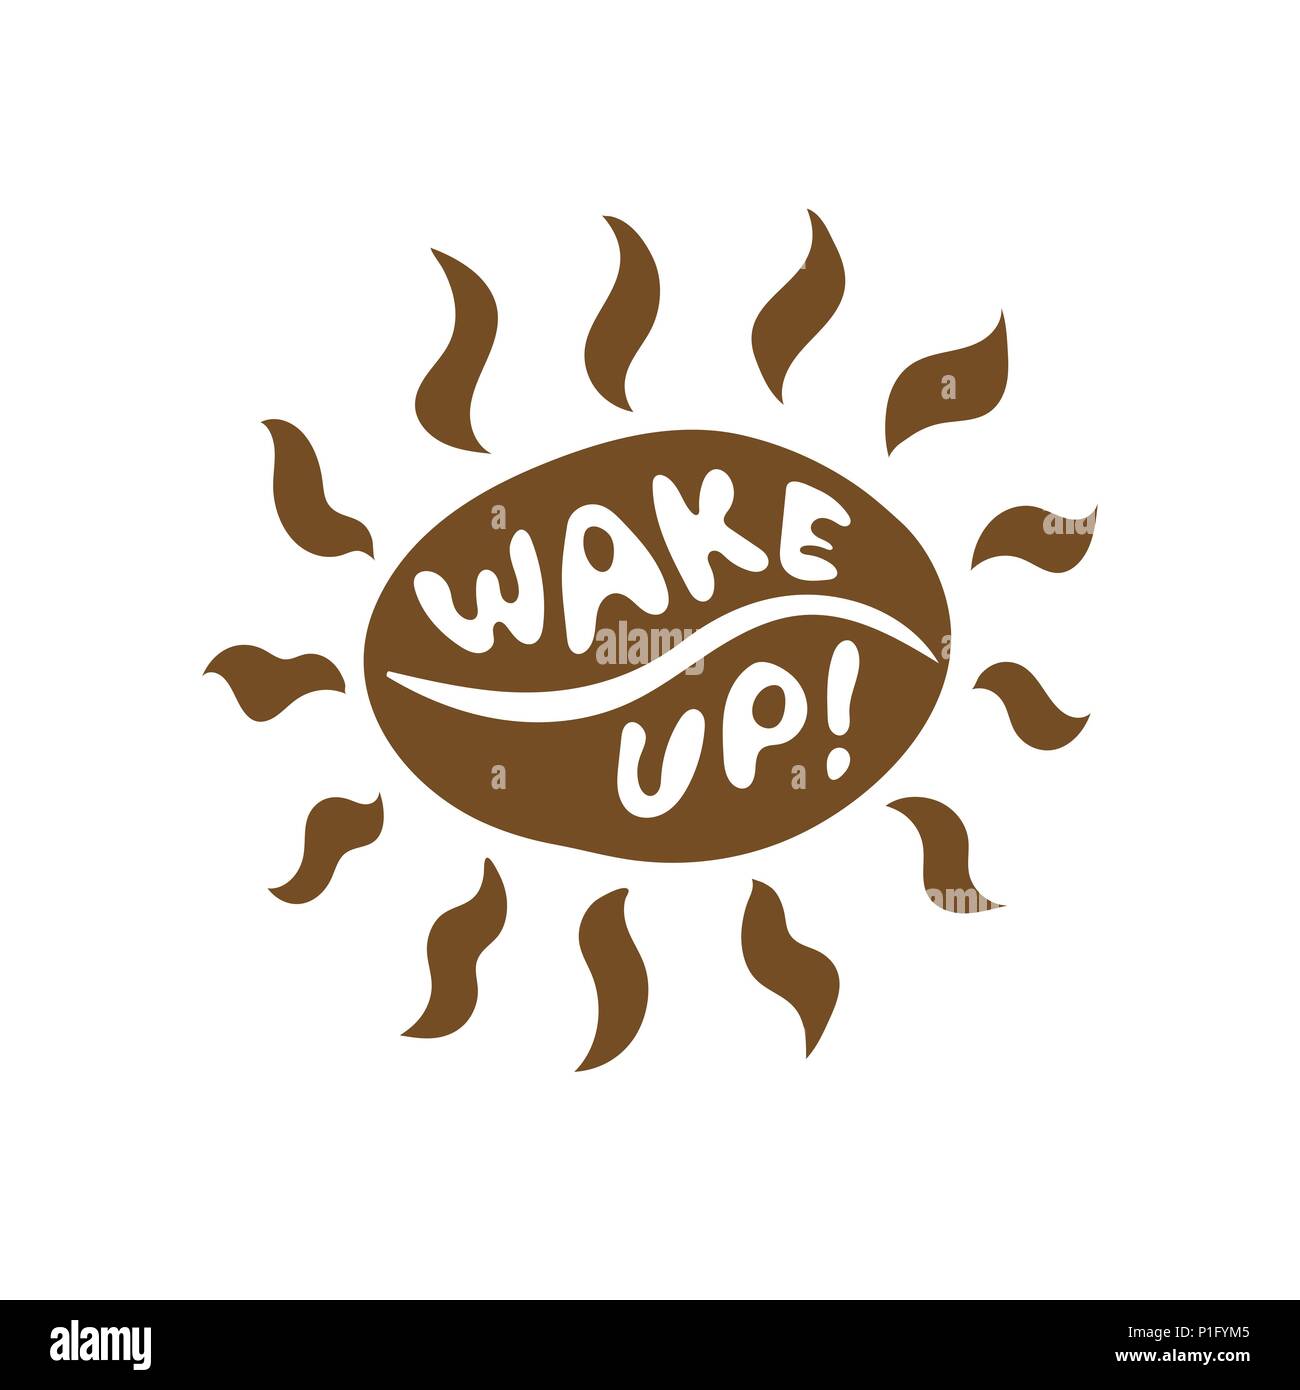 Funny brown coffee bean sun with beams icon with lettering Wake up! Stock Vector